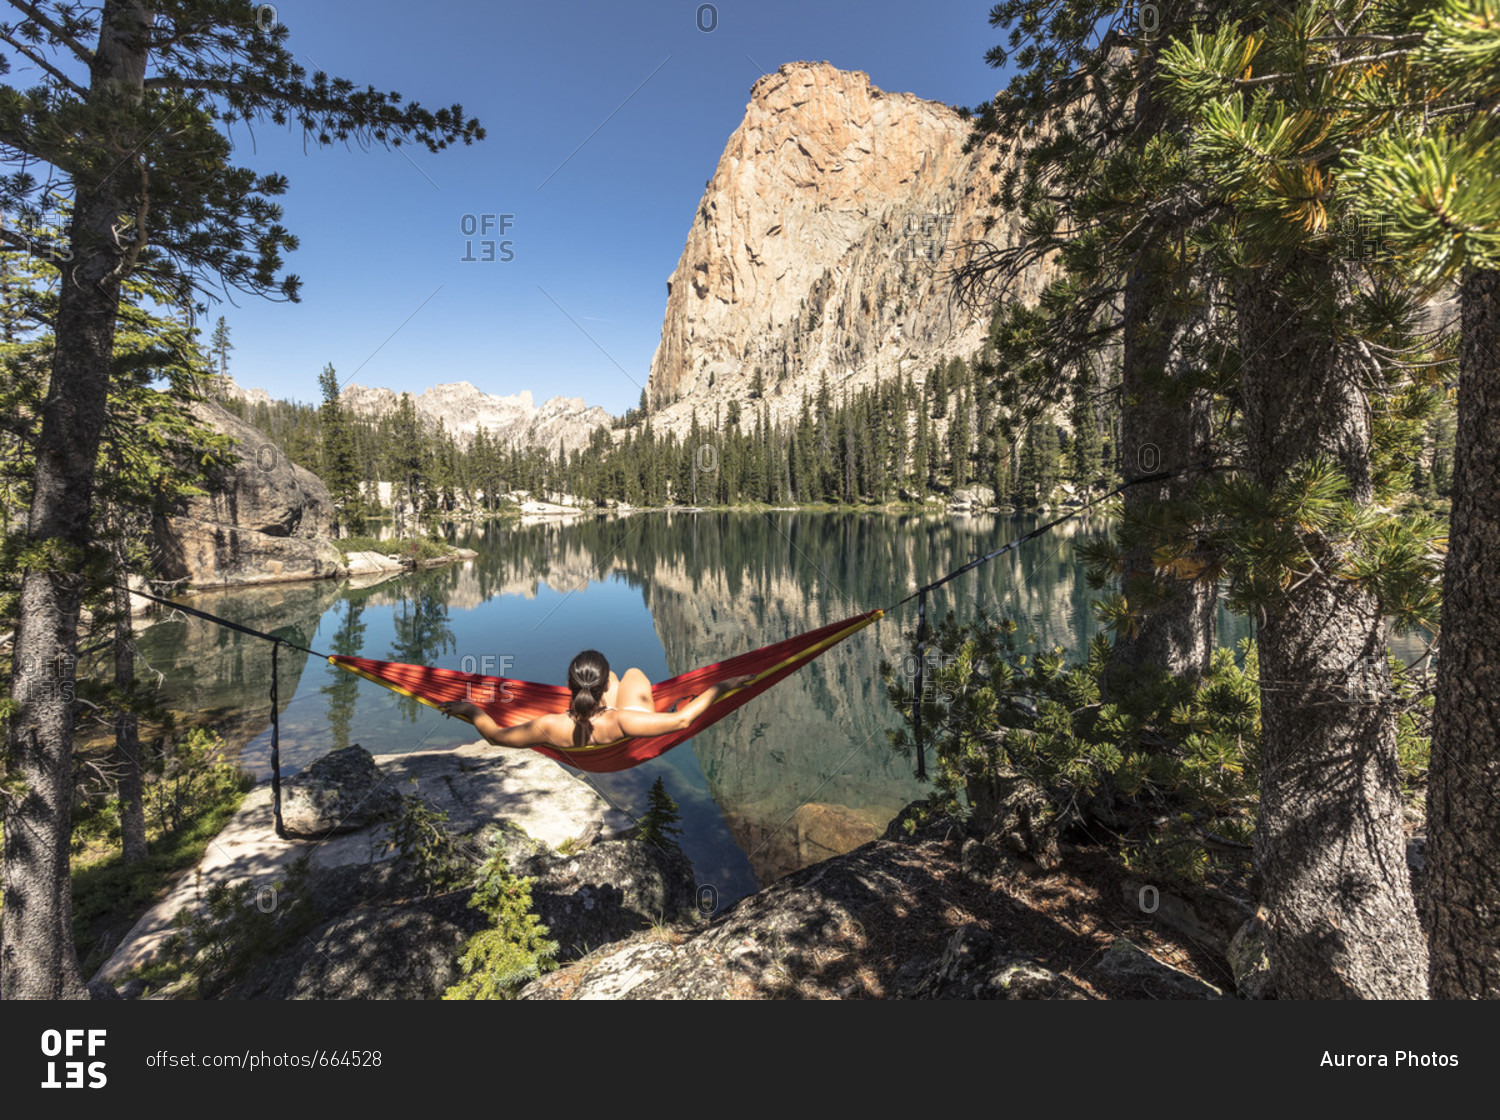 Female hiker relaxing in hammock between two pine trees overlooking Elephants Perch and Saddleback Lake, Sawtooth National Recreation Area, Stanley, Idaho, USA